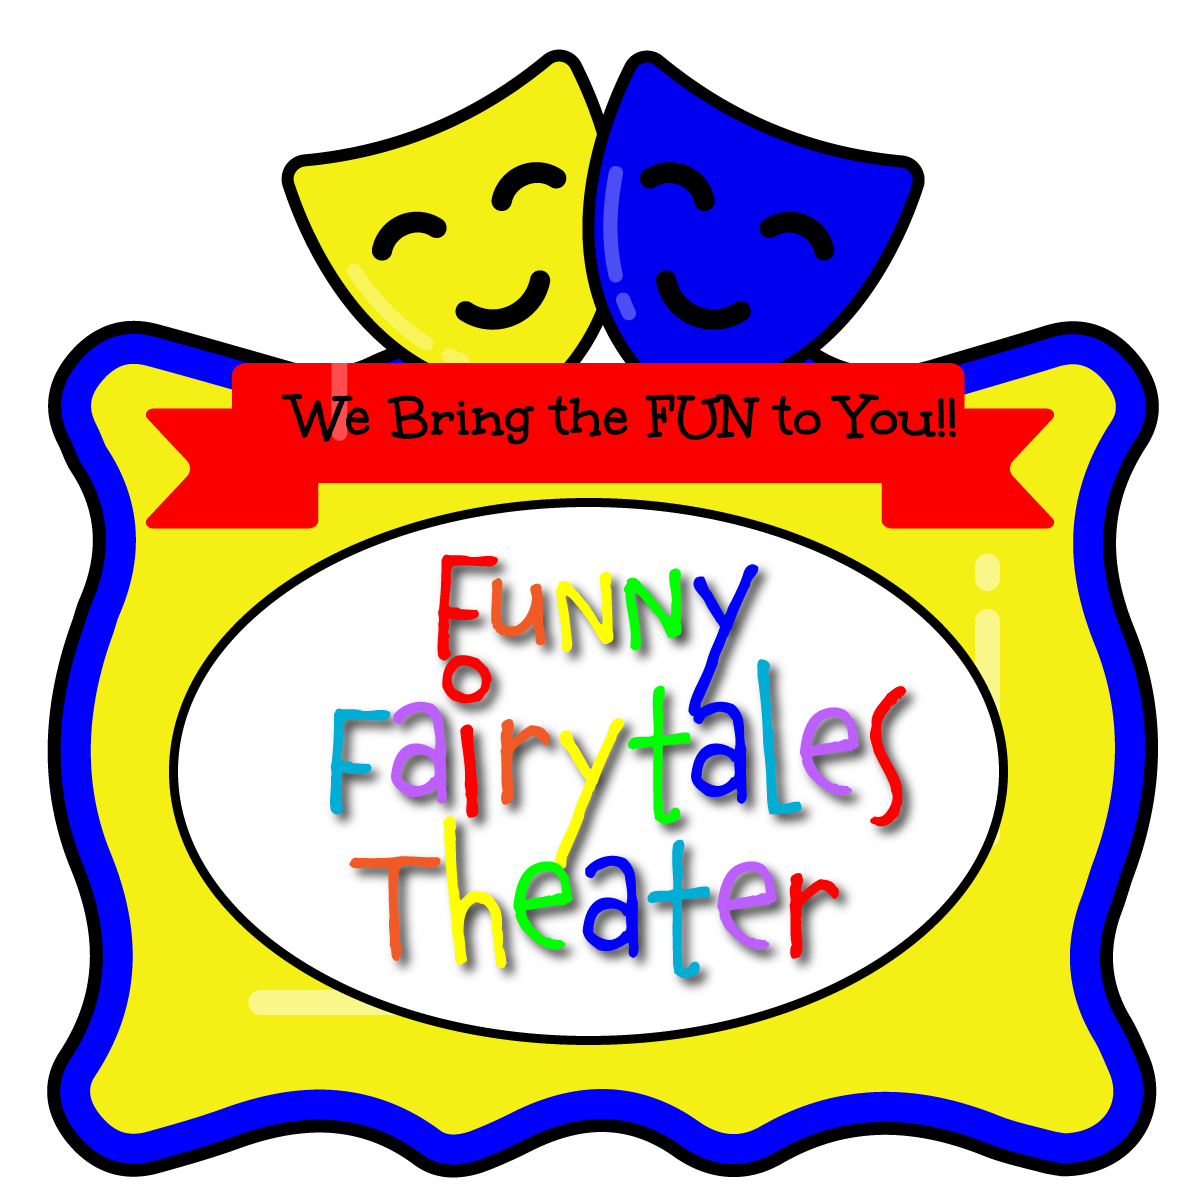 Funny Fairytales Theater